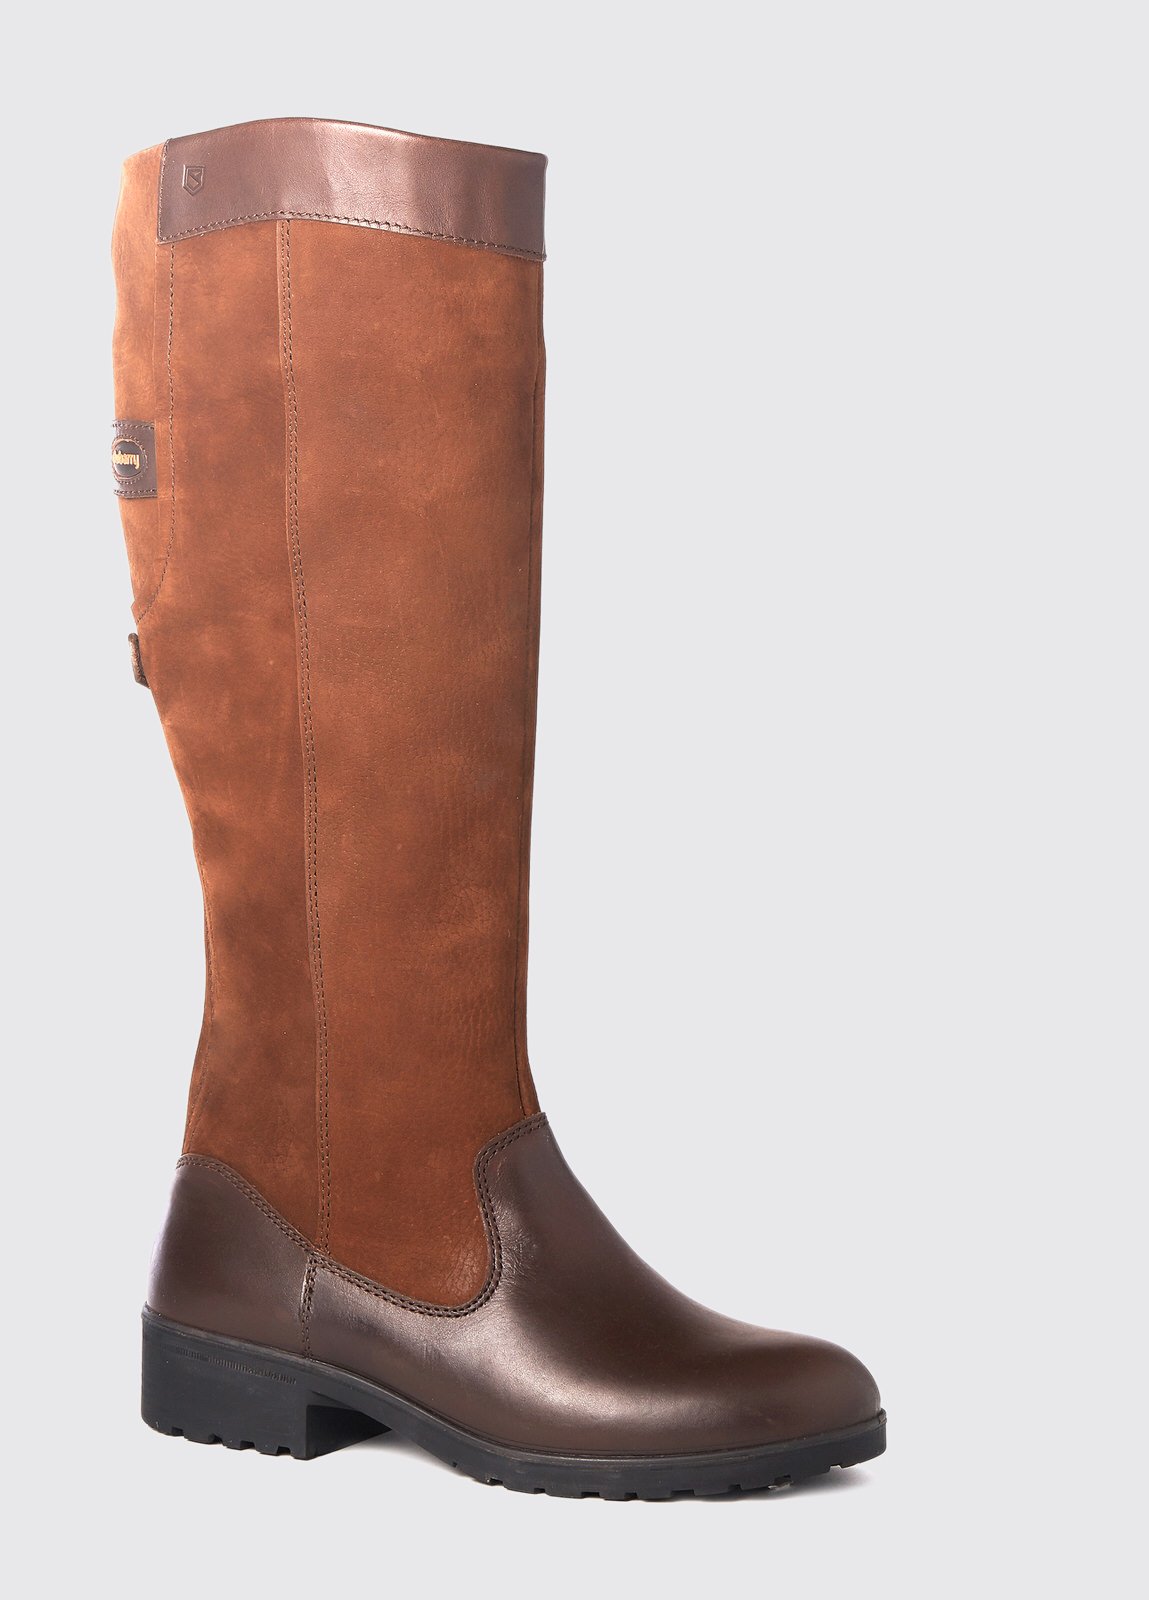 Dubarry Clare Country Boot in Walnut.jpg